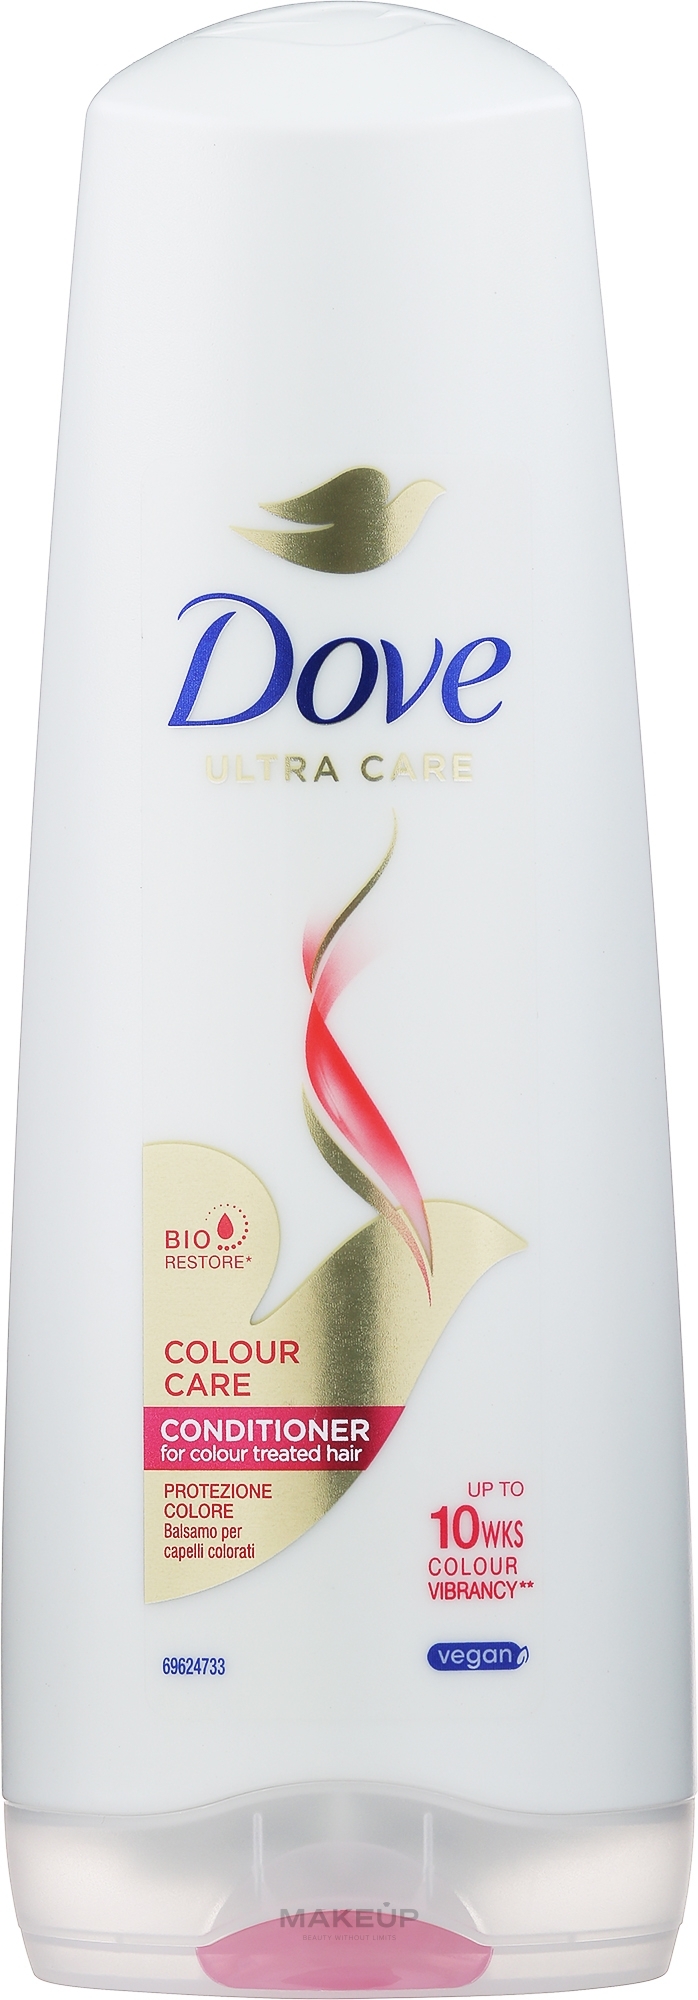 Color-Treated Hair Conditioner "Color Preserving" - Dove Nutritive Solutions — photo 350 ml